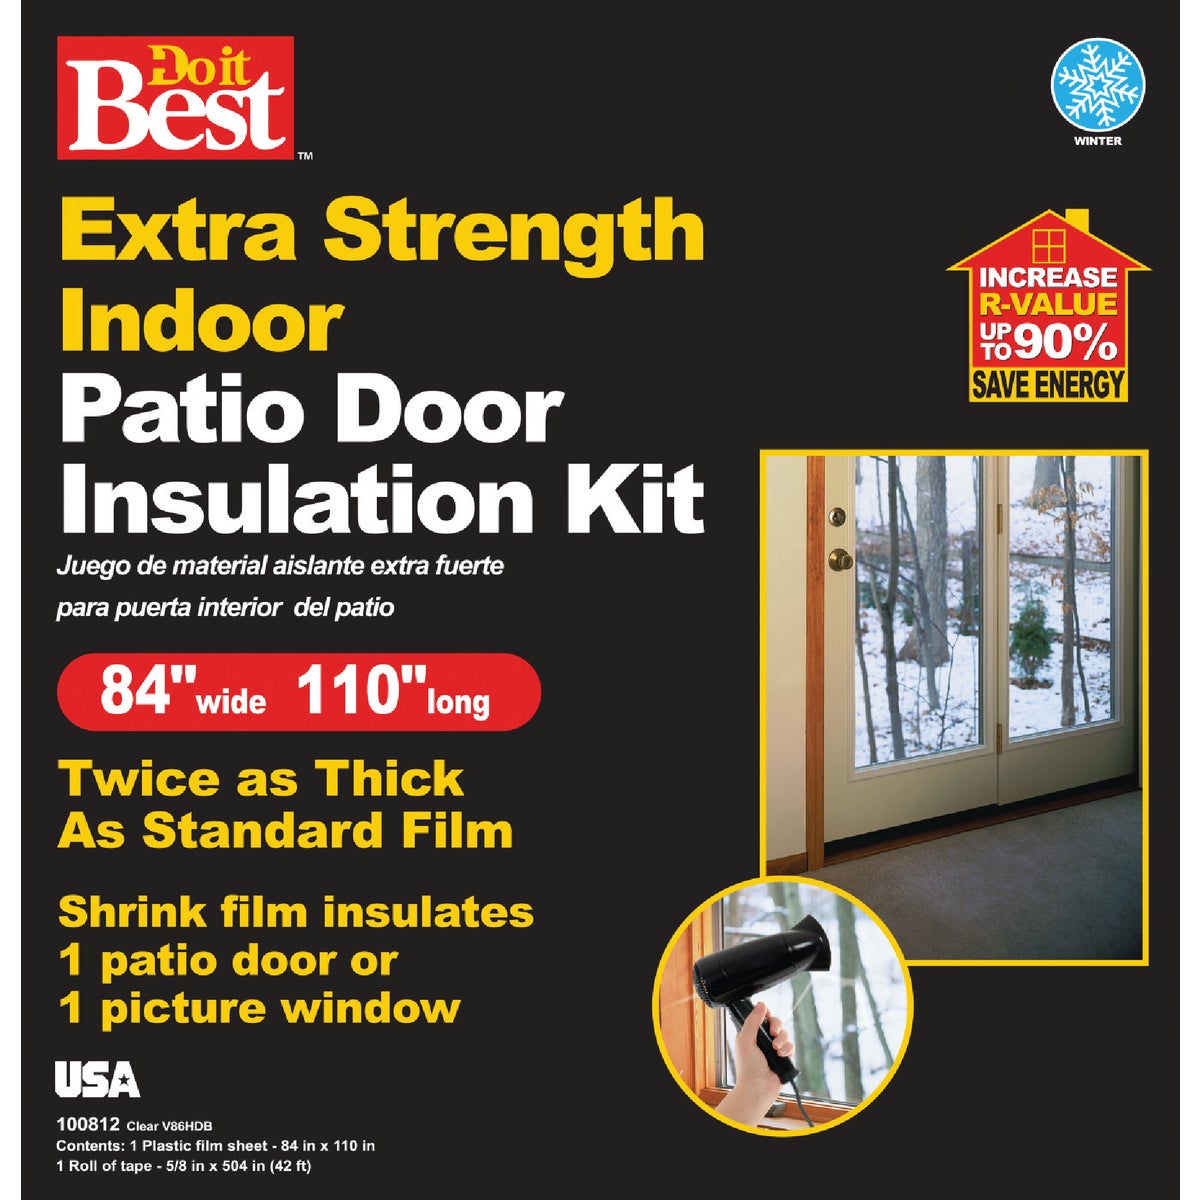 Item 100812, Extra strength indoor patio door insulation kit is twice as thick as 